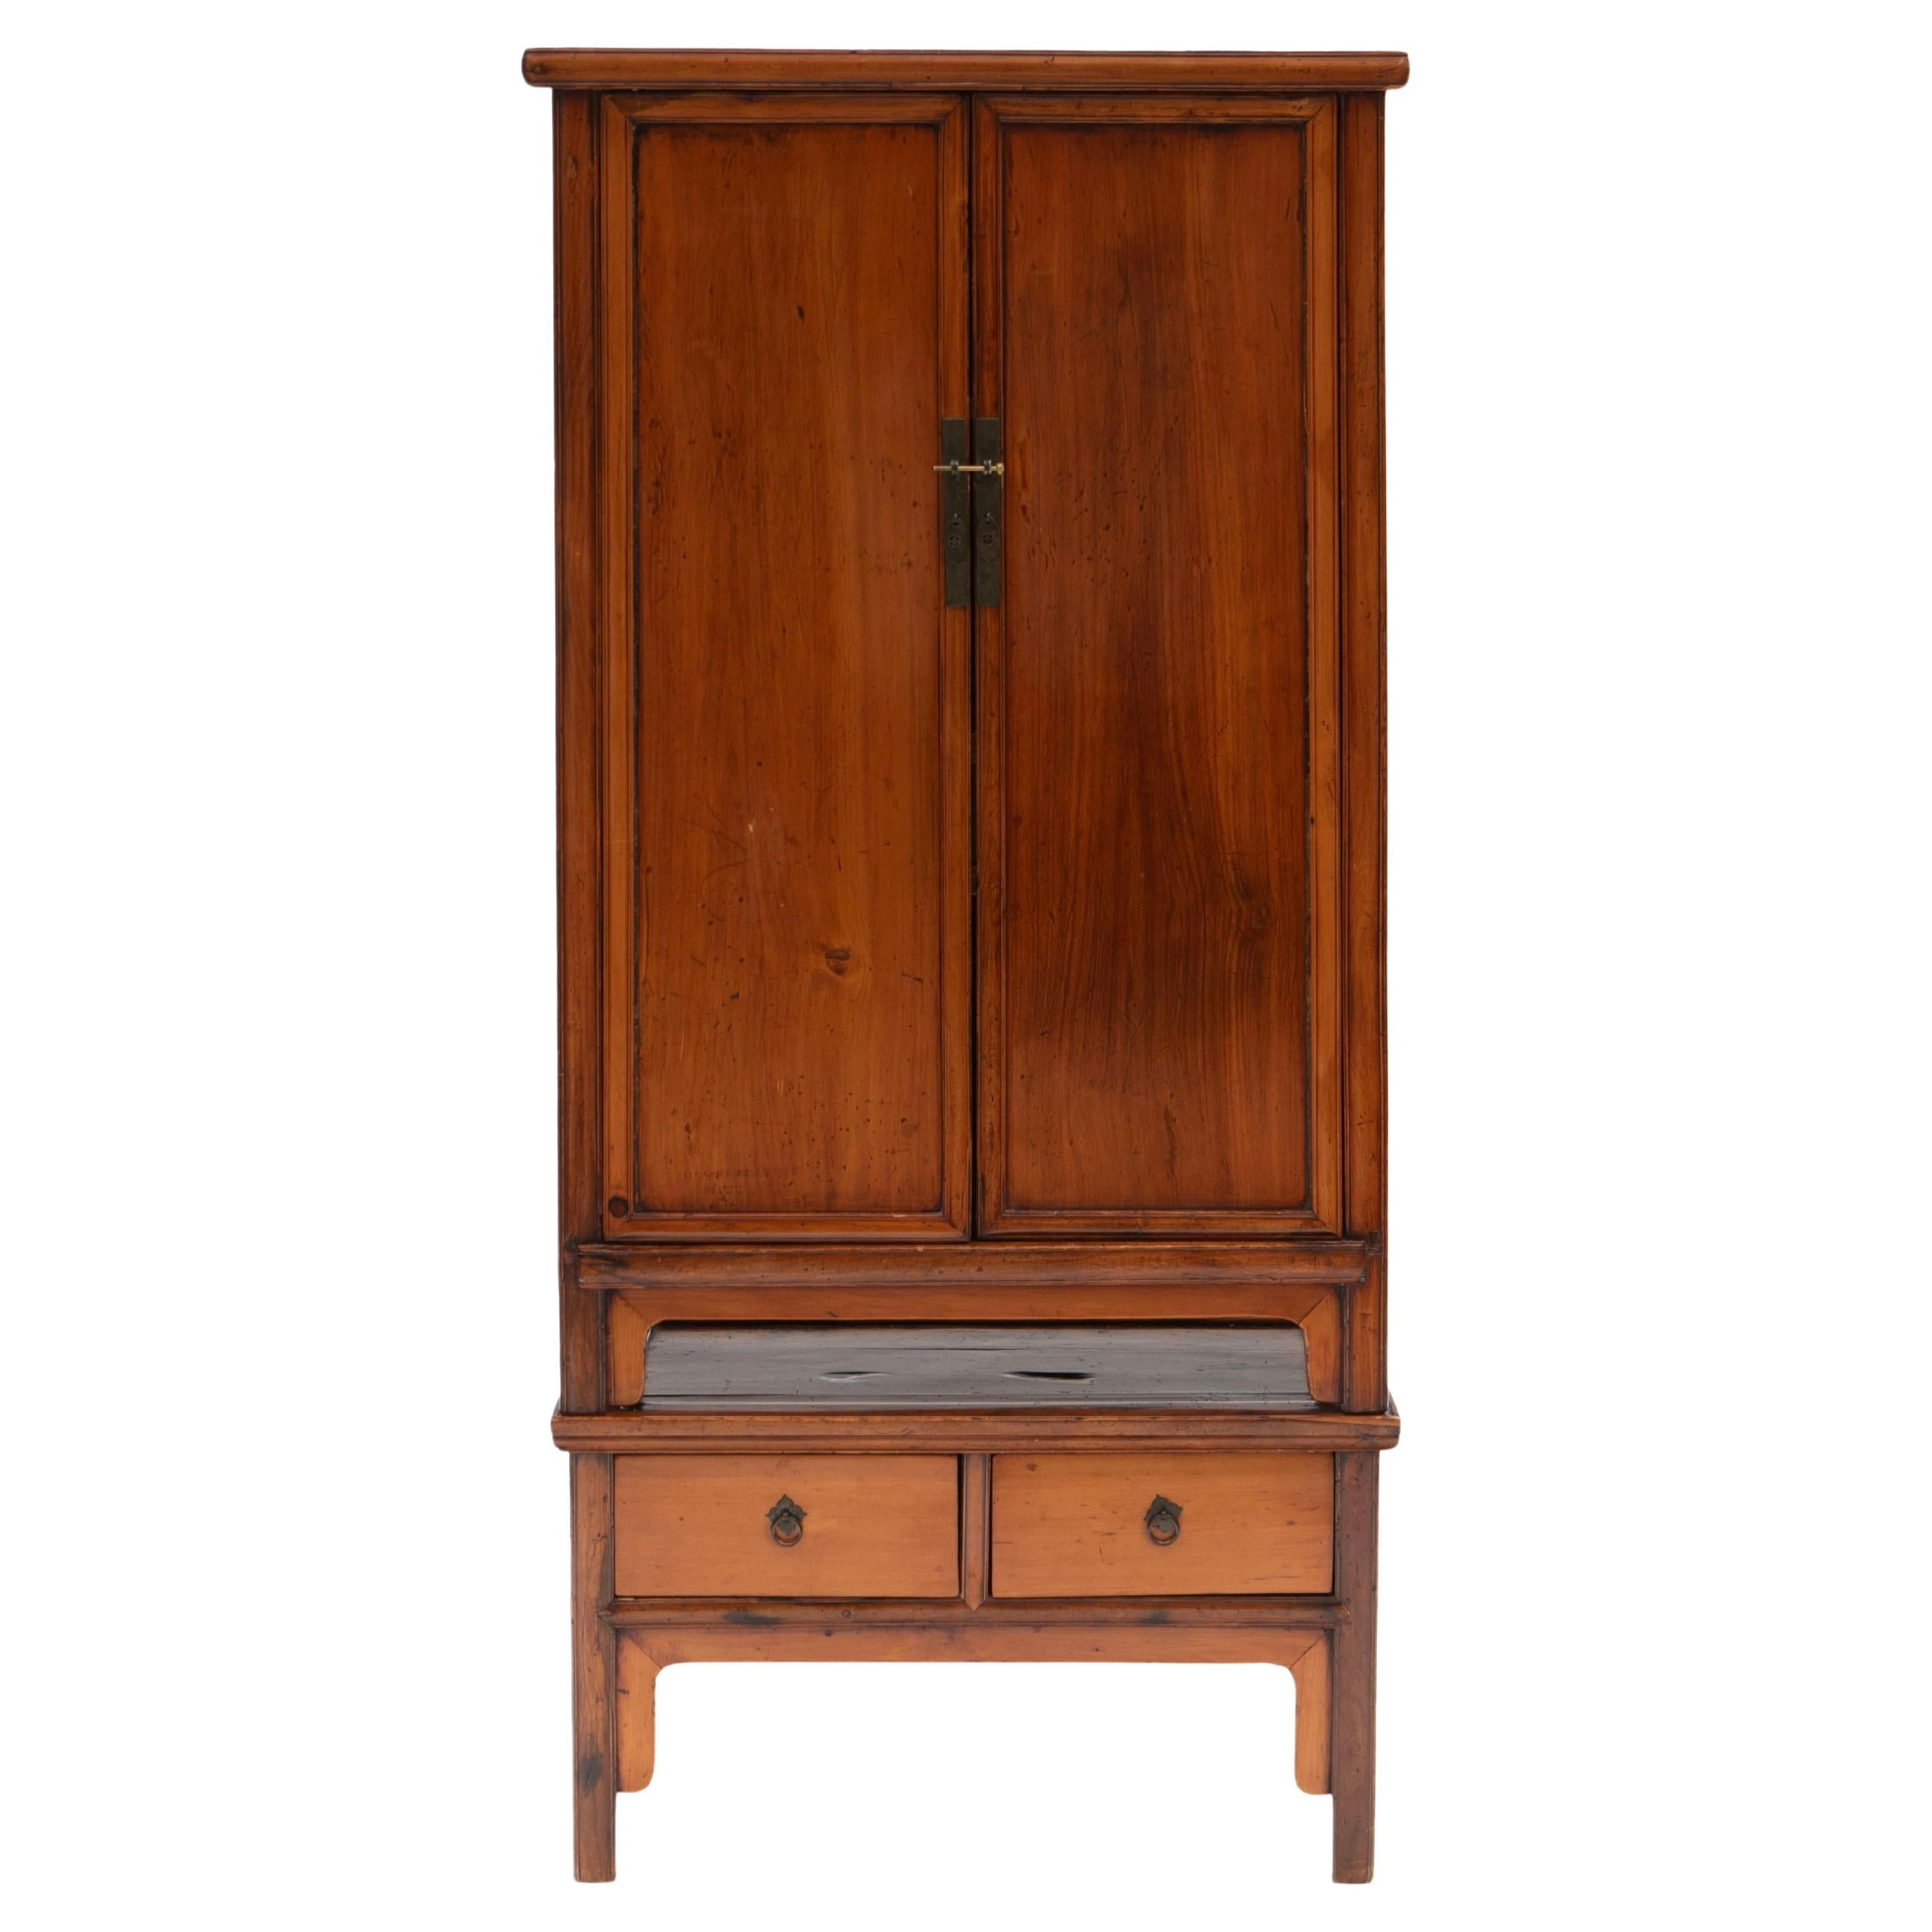 Antique 19th Century Ming Style Cabinet in Peachwood